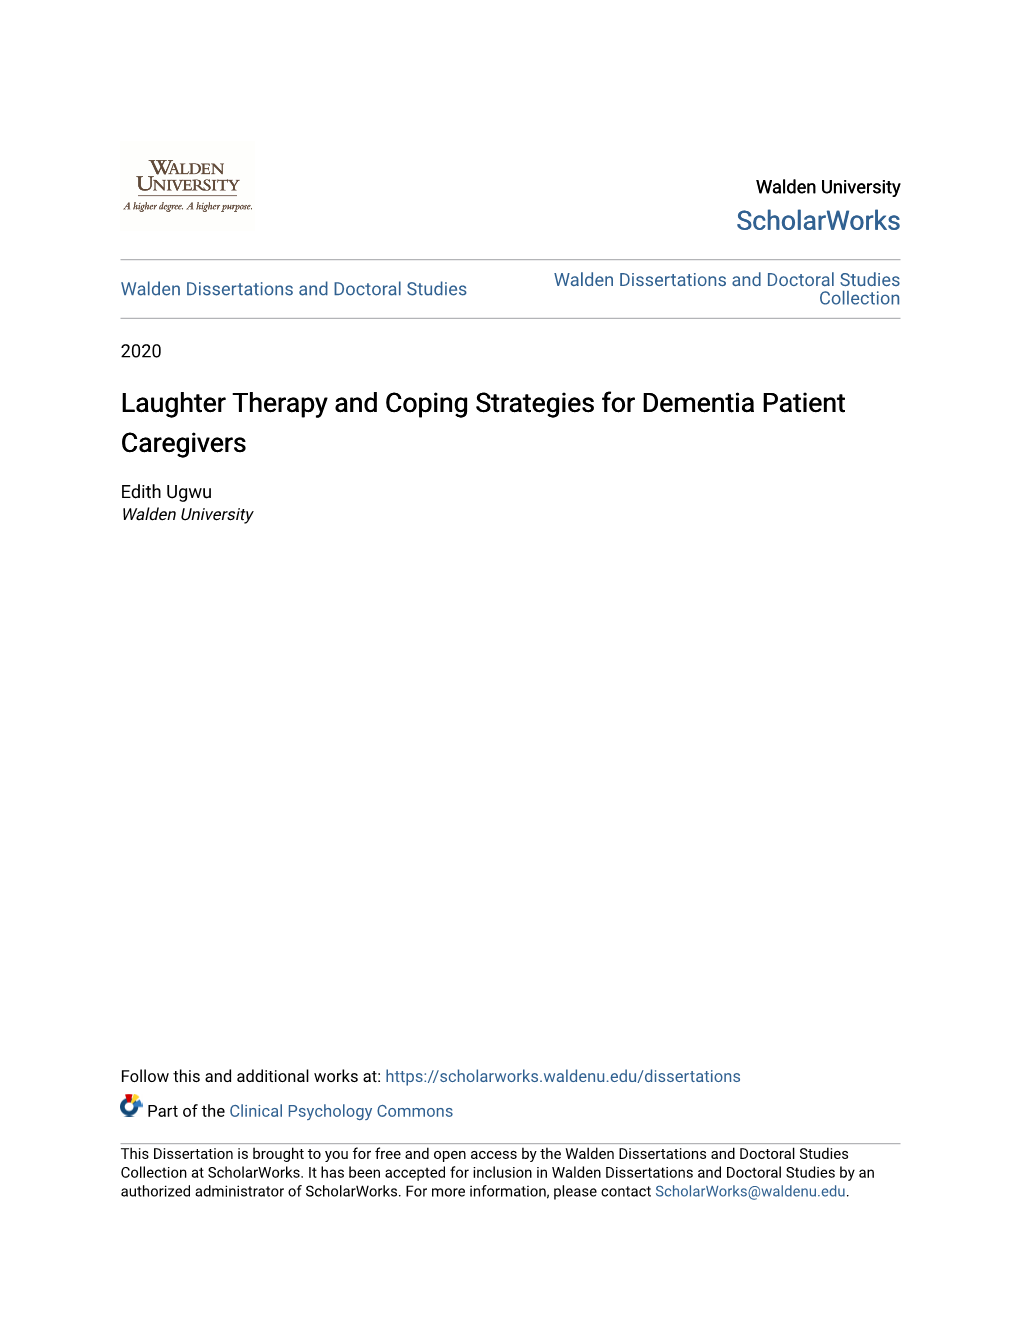 Laughter Therapy and Coping Strategies for Dementia Patient Caregivers